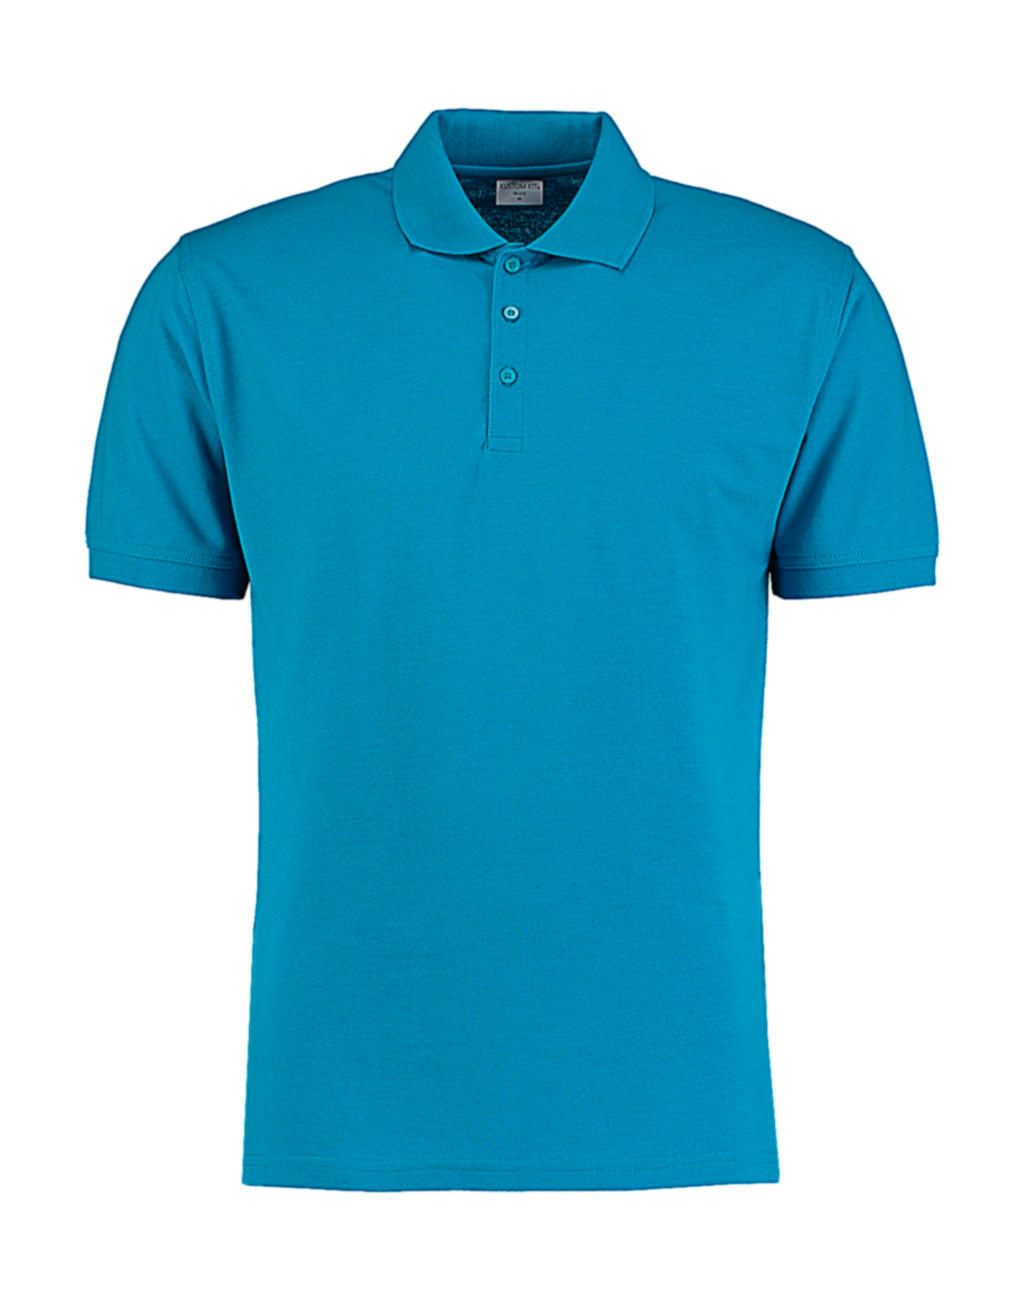  Klassic Slim Fit Polo Superwash? 60? in Farbe Turquoise